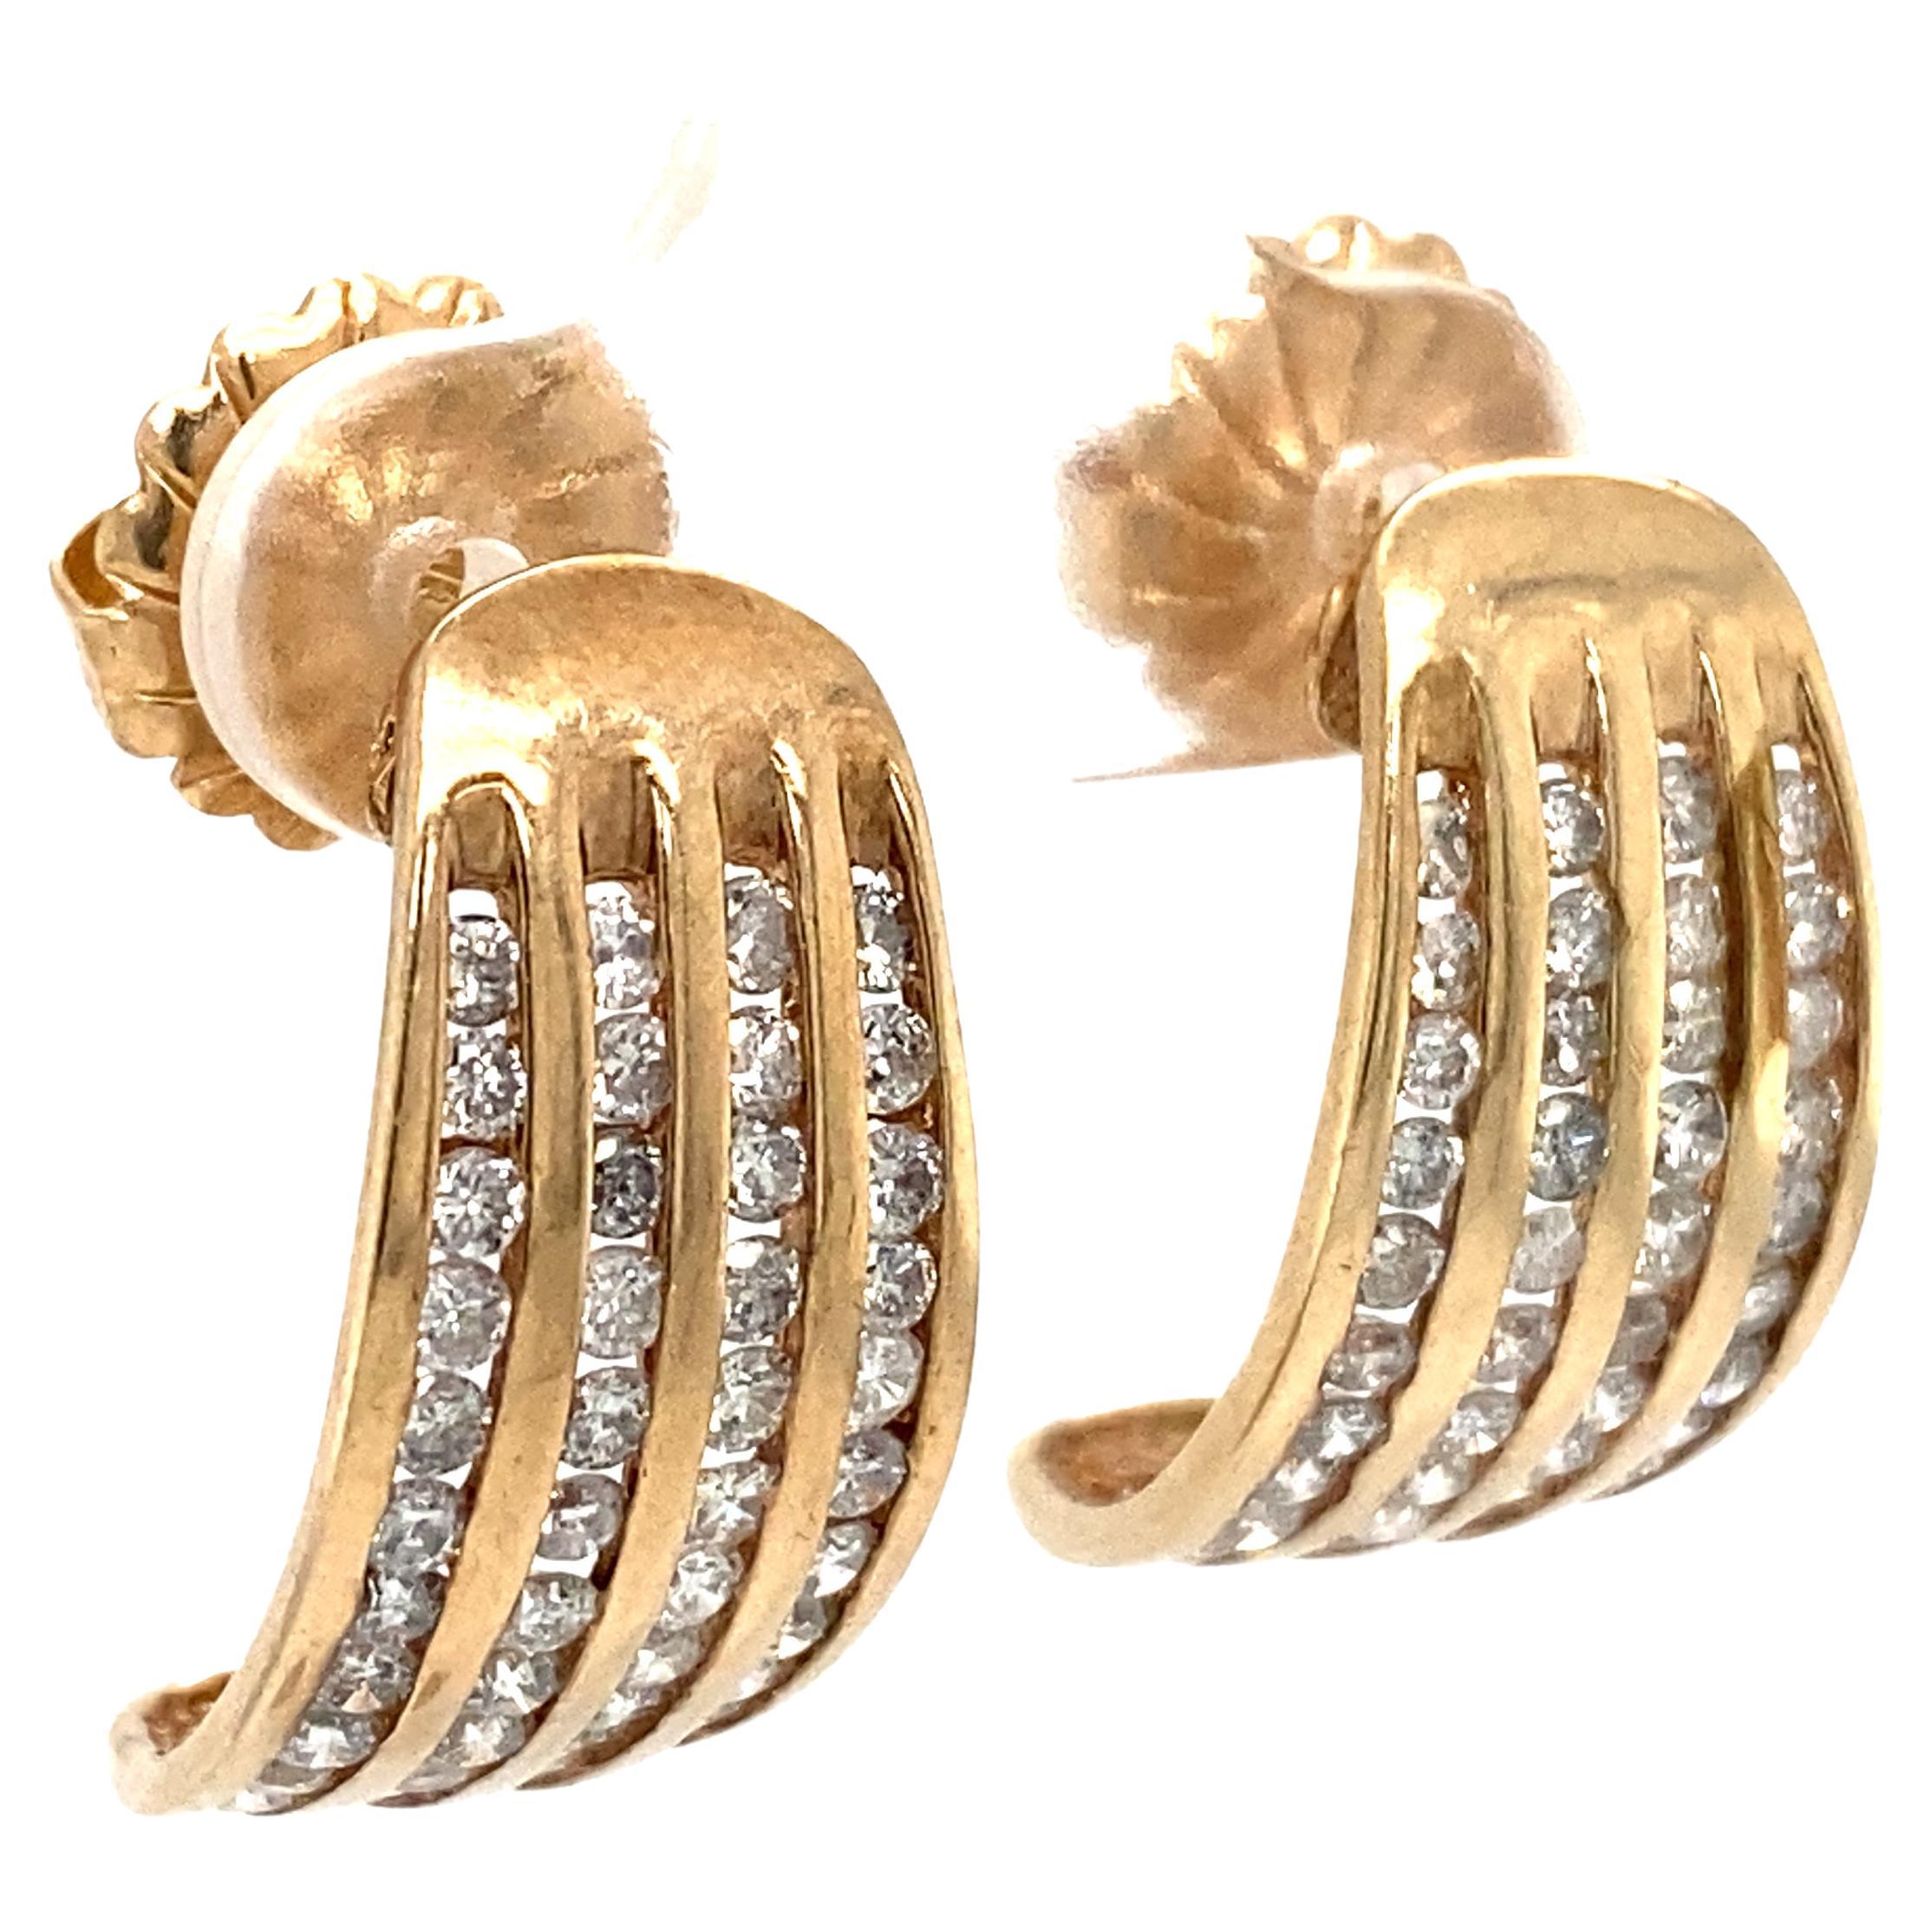 1960s Curved Four Row Channel Set Diamond Earrings in 10 Karat Gold For Sale